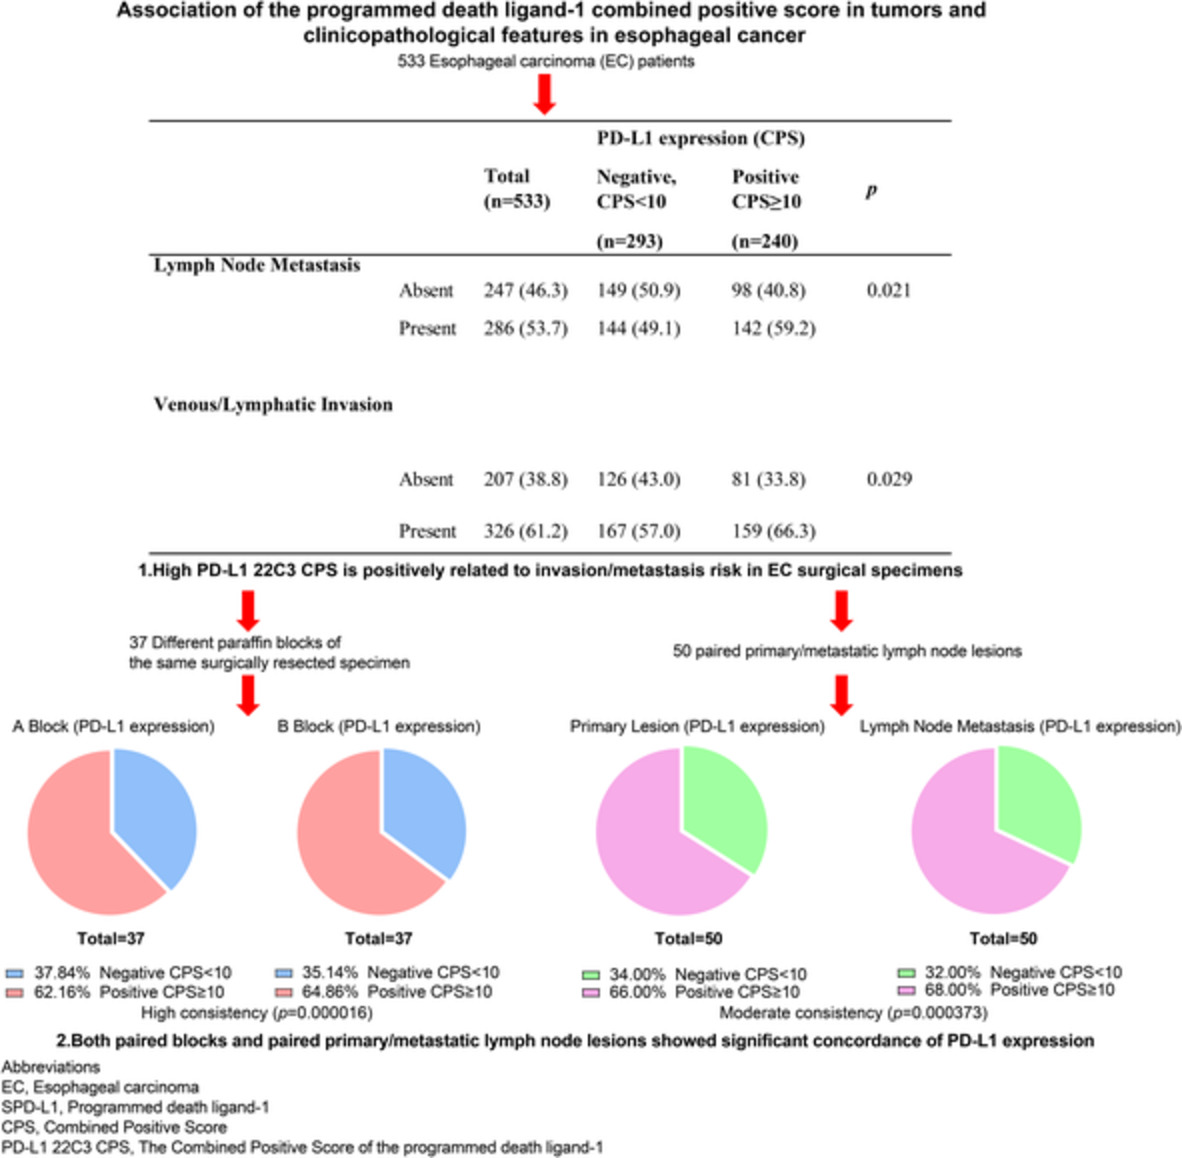 Association of the programmed death ligand‐1 combined positive score in tumors and clinicopathological features in esophageal cancer